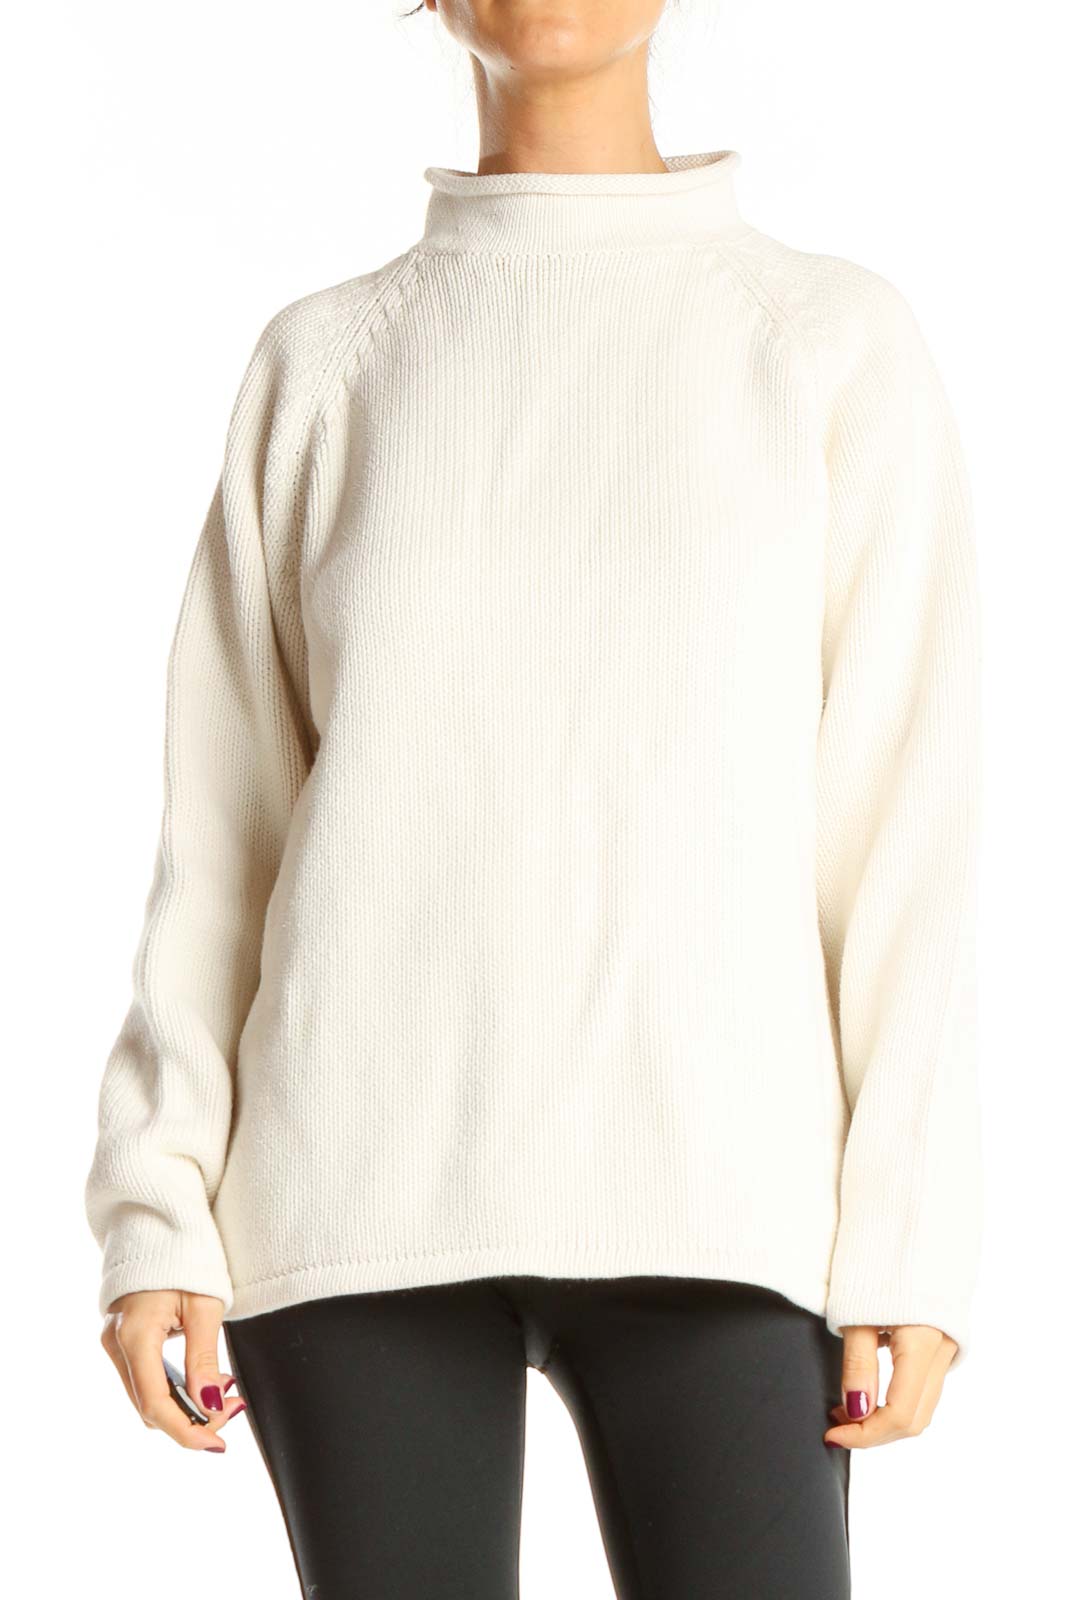 White Classic Sweater Front